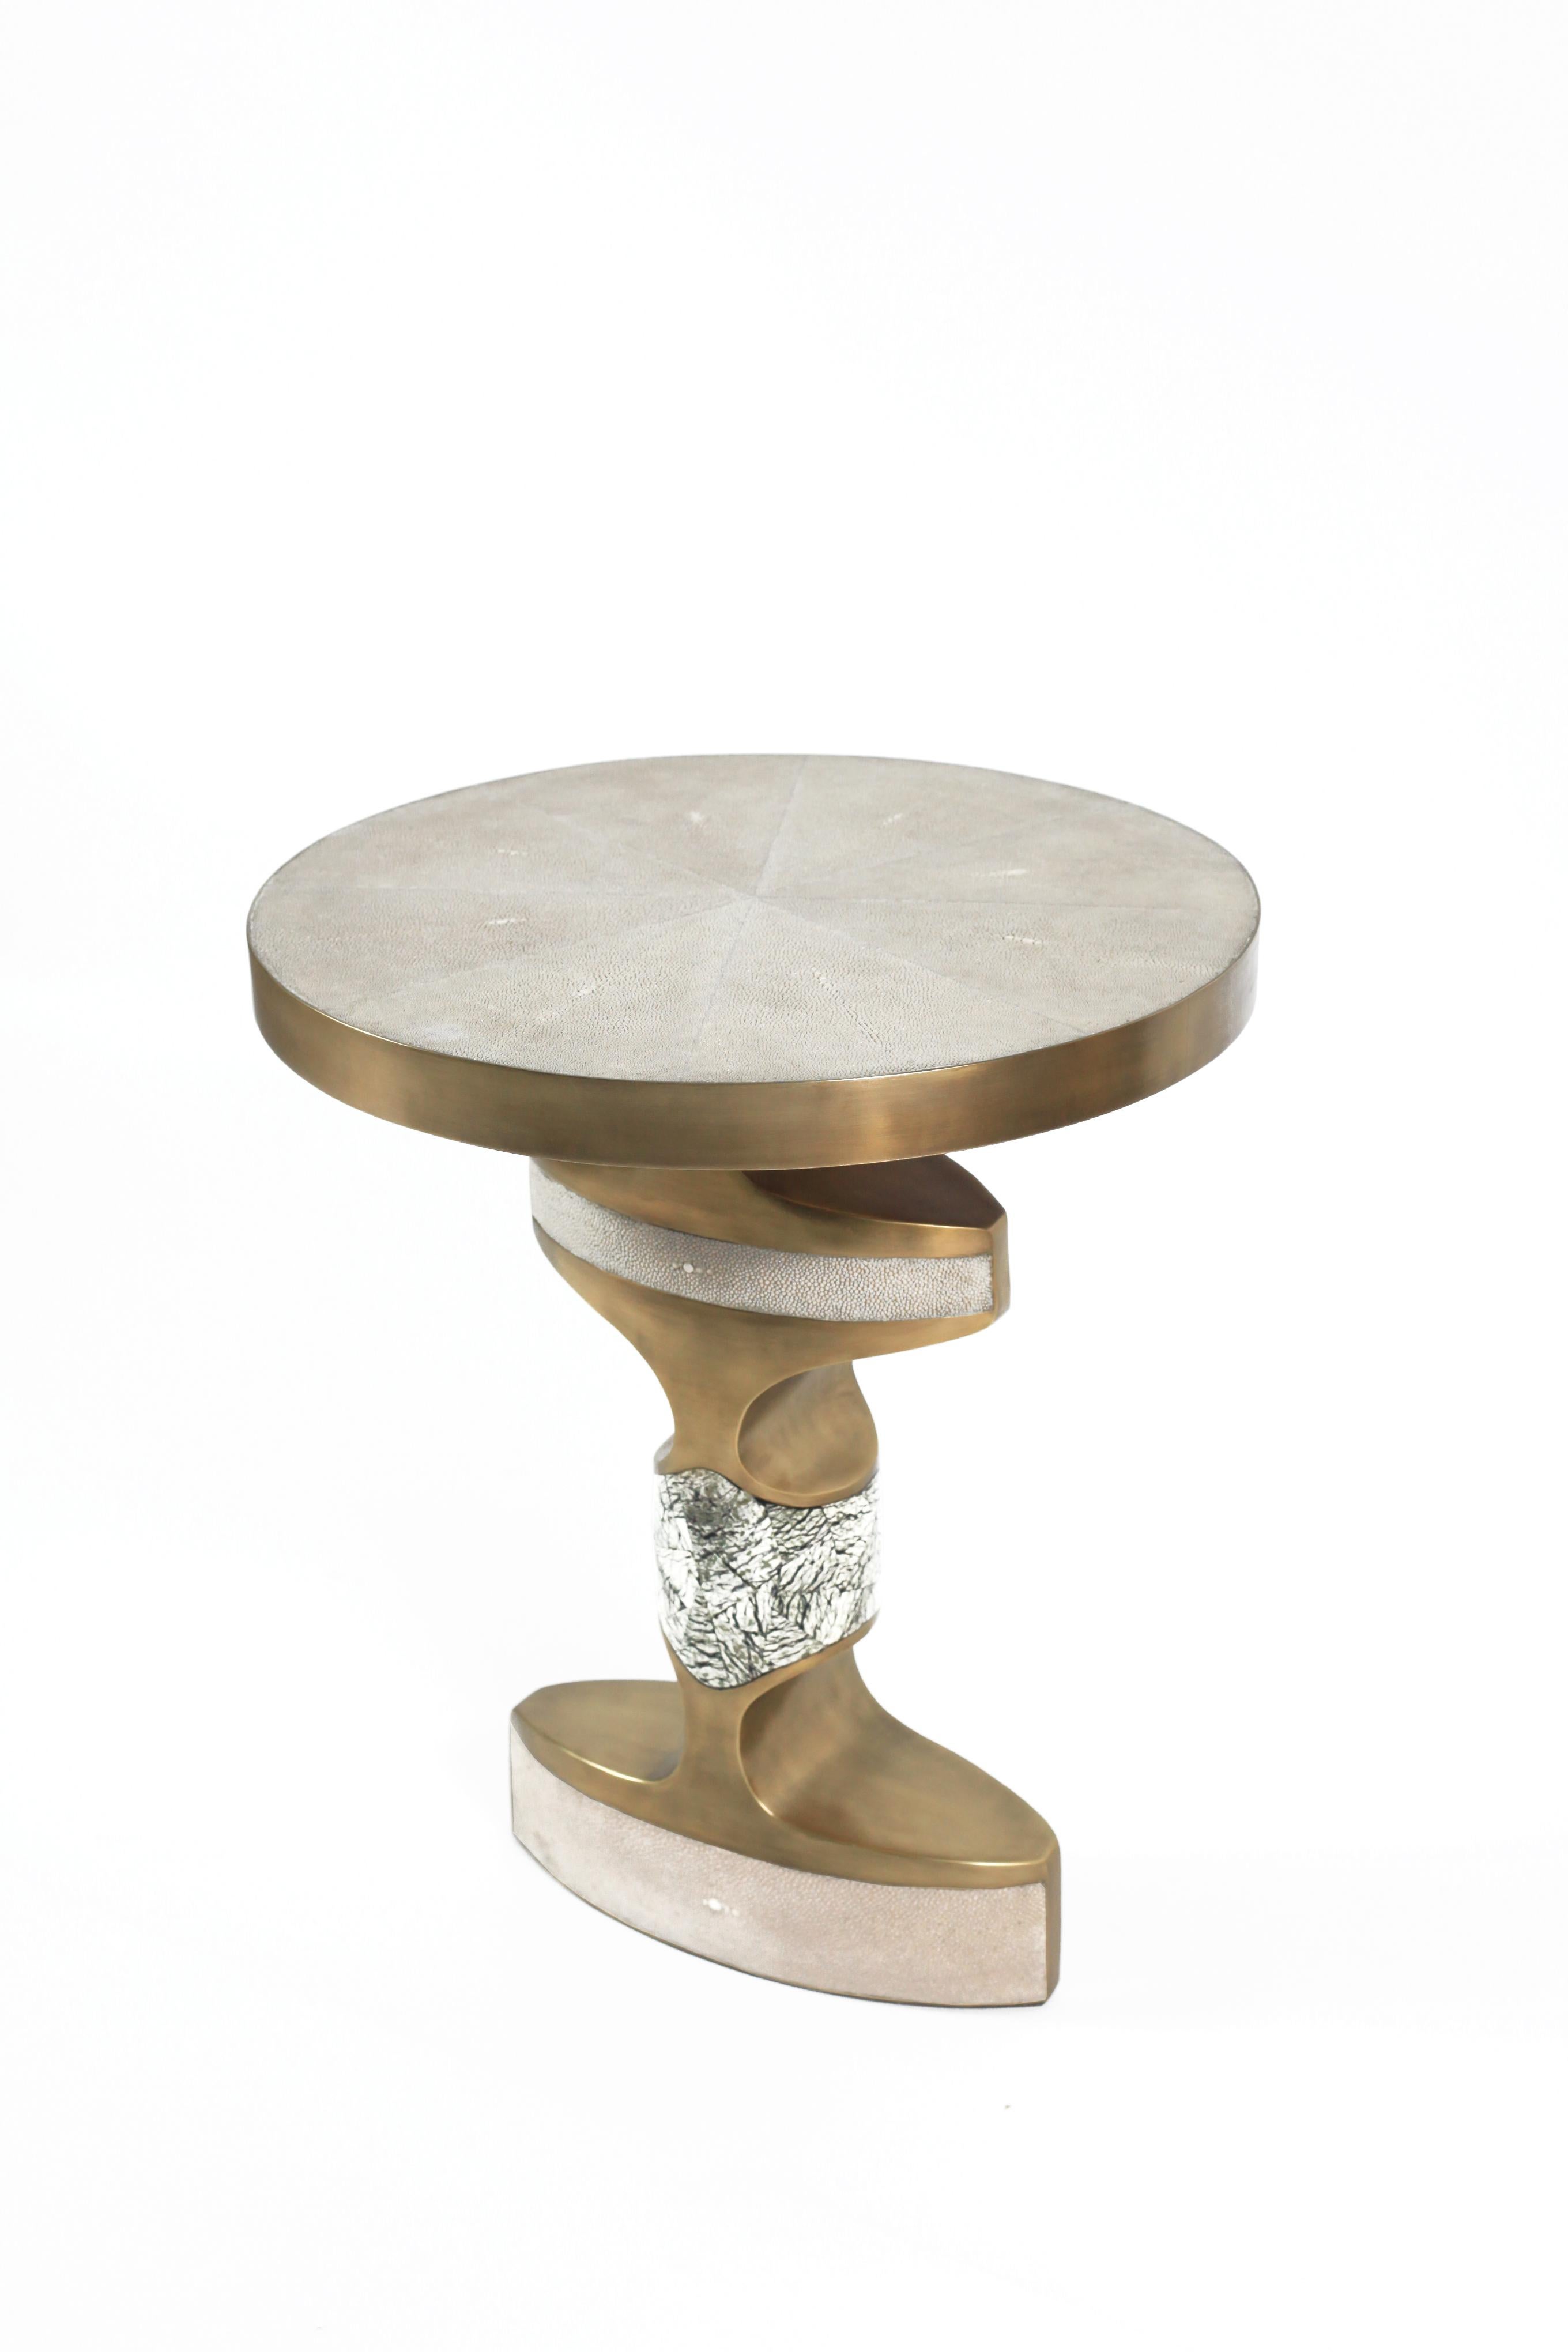 The Carmen Side Table is an elegant and sculptural piece that will light up your space with it’s exotic details. Inlaid in 3 different materials: cream shagreen, Baguio stone and finished with bronze-patina brass accents. Available in a mink